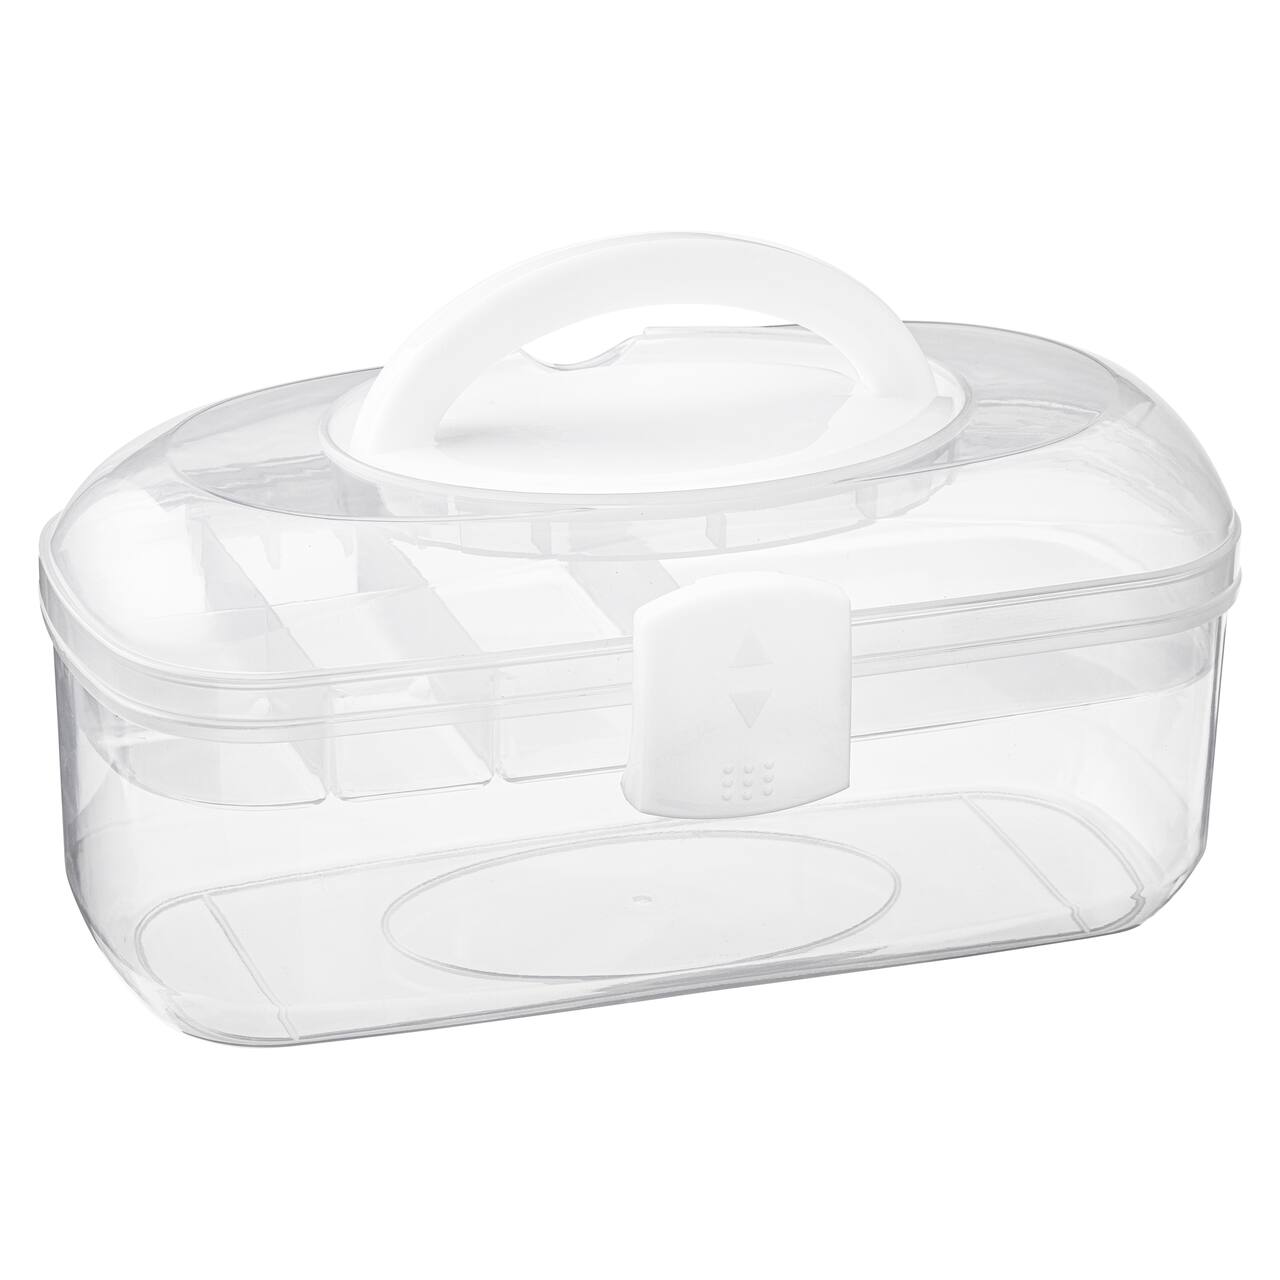 12 Pack: Plastic Bead Organizer with Removable Tray by Simply Tidy™